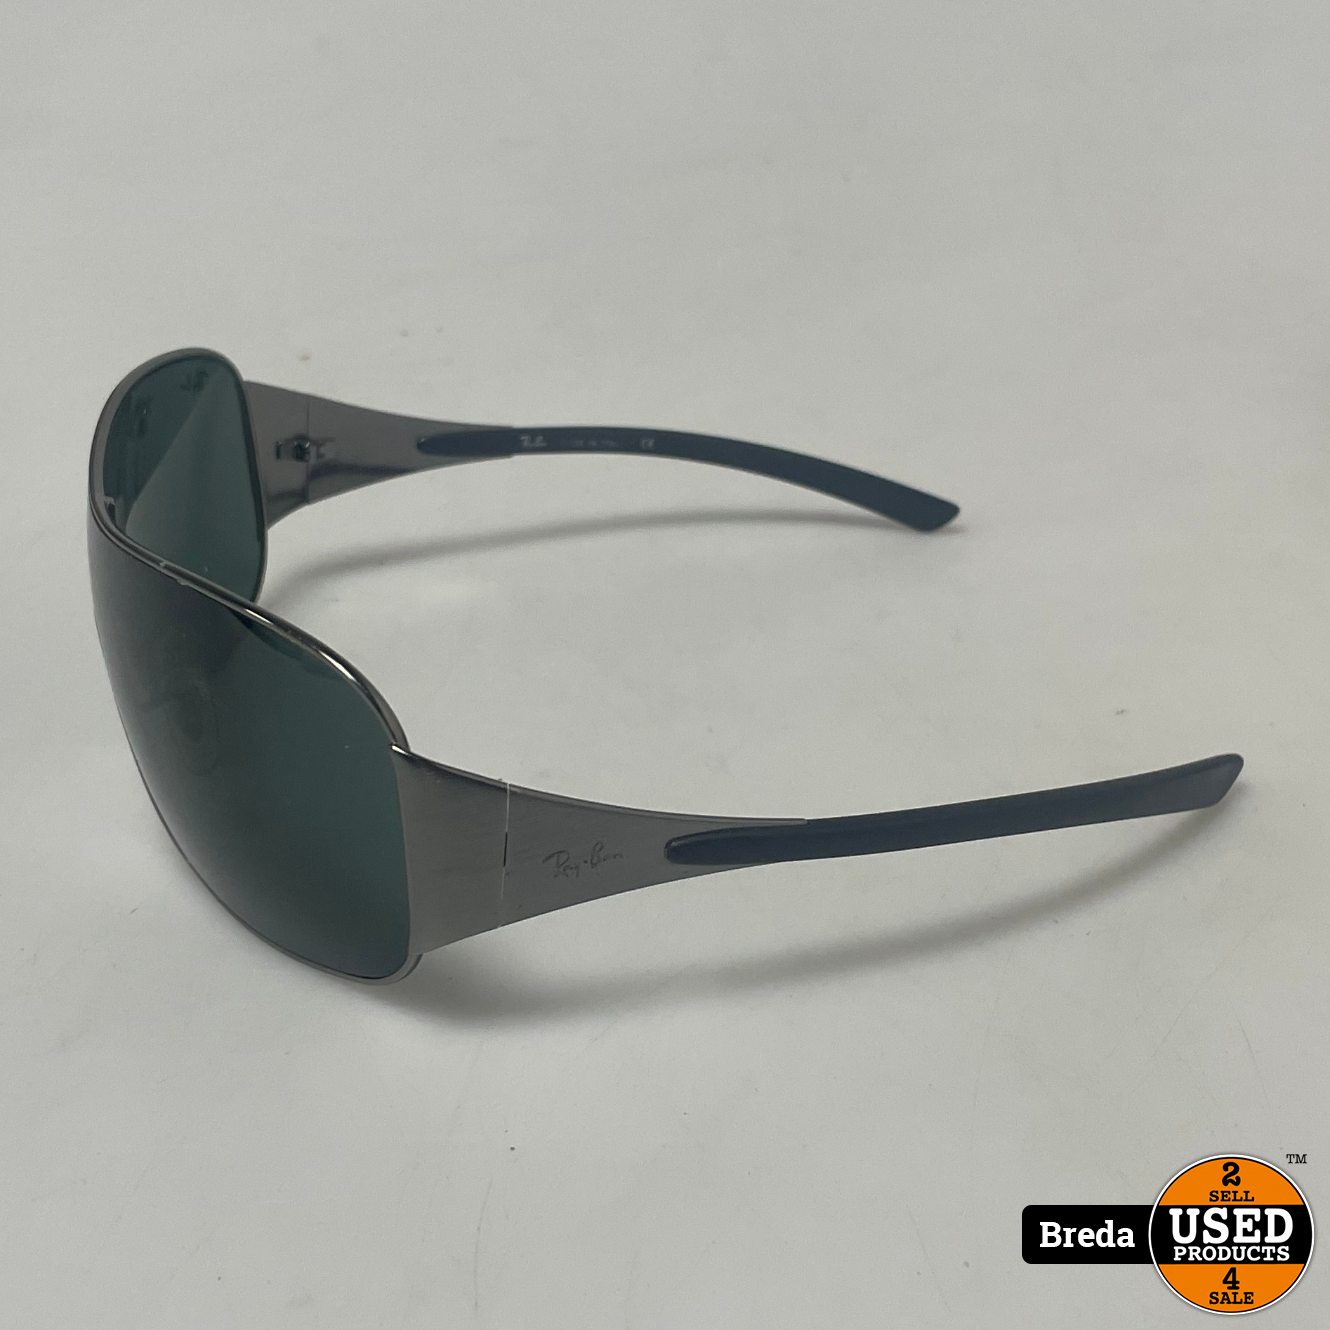 motor Beleefd Wortel Ray-Ban Highstreet RB 3321 Zonnebril | In hoes - Used Products Breda